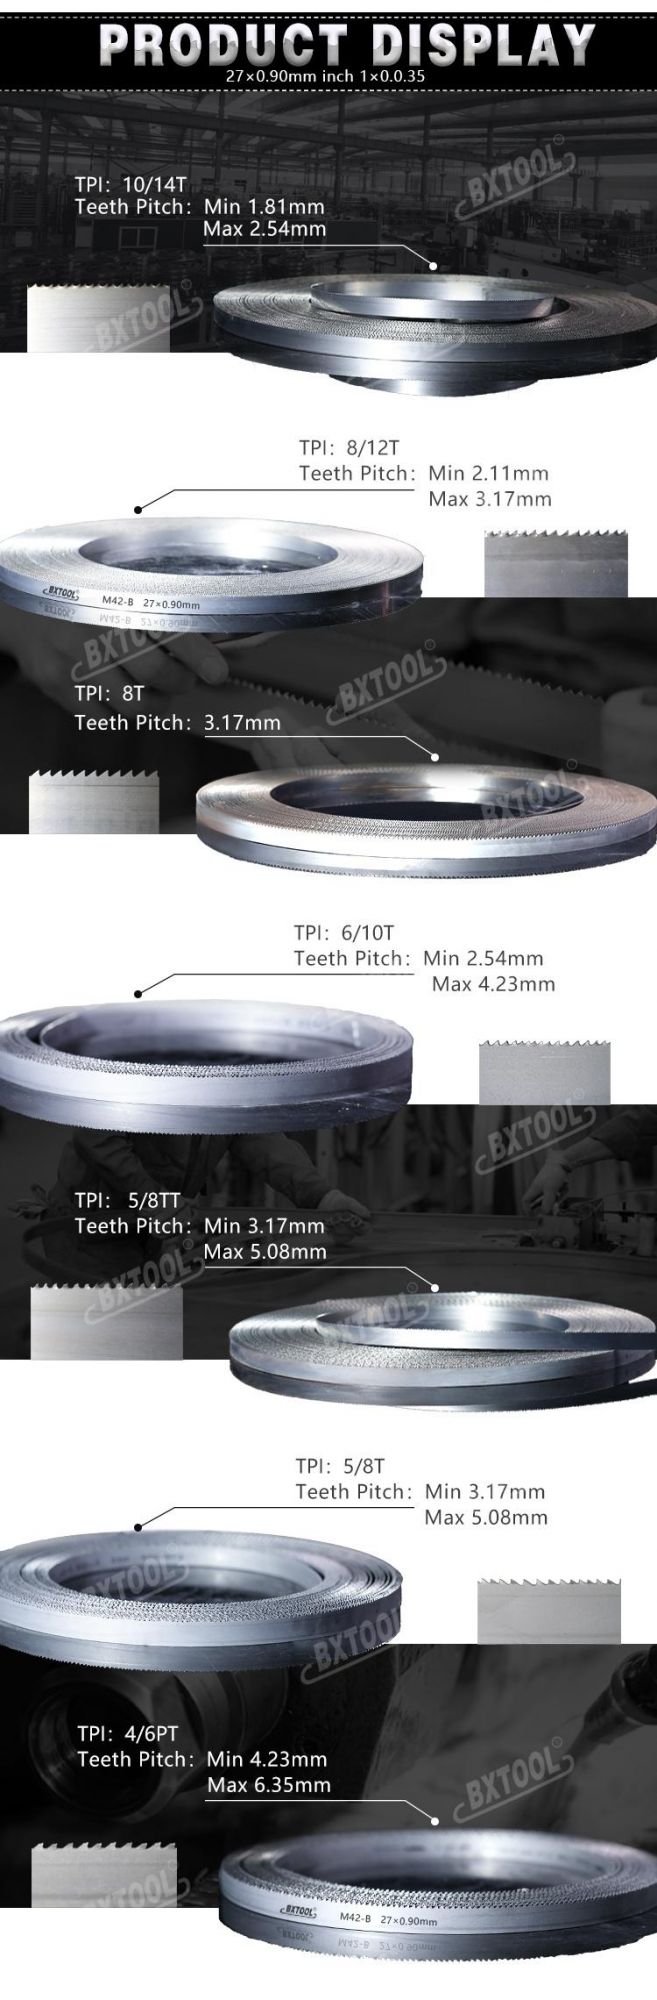 M42 HSS Reasonable Price and High Quality Cutting Bi Metal Band Saw Blade for Meat Bone